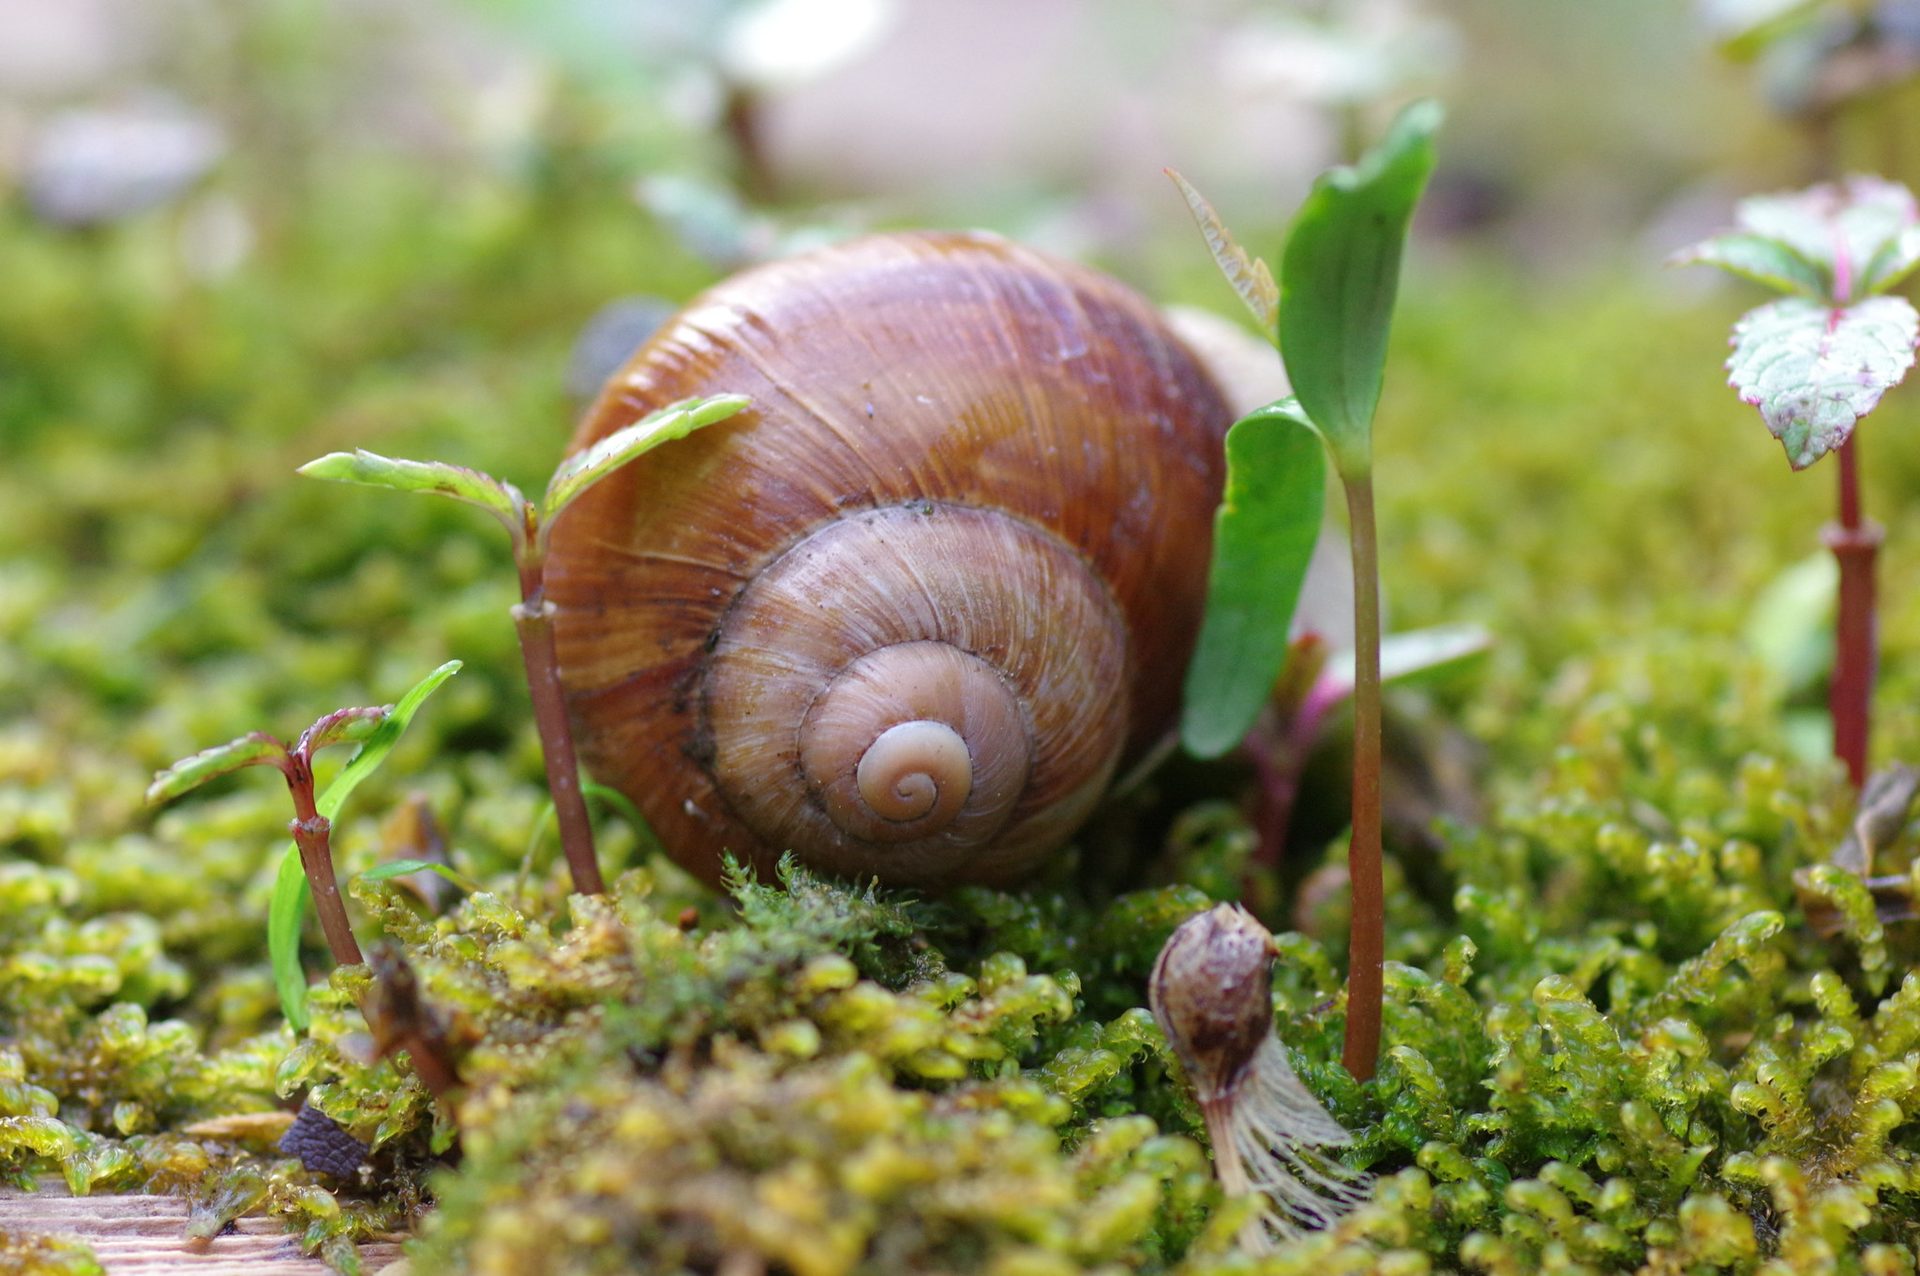 Snails and slugs, Natural environment, Terrestrial plant, Snail, Organism, Grass